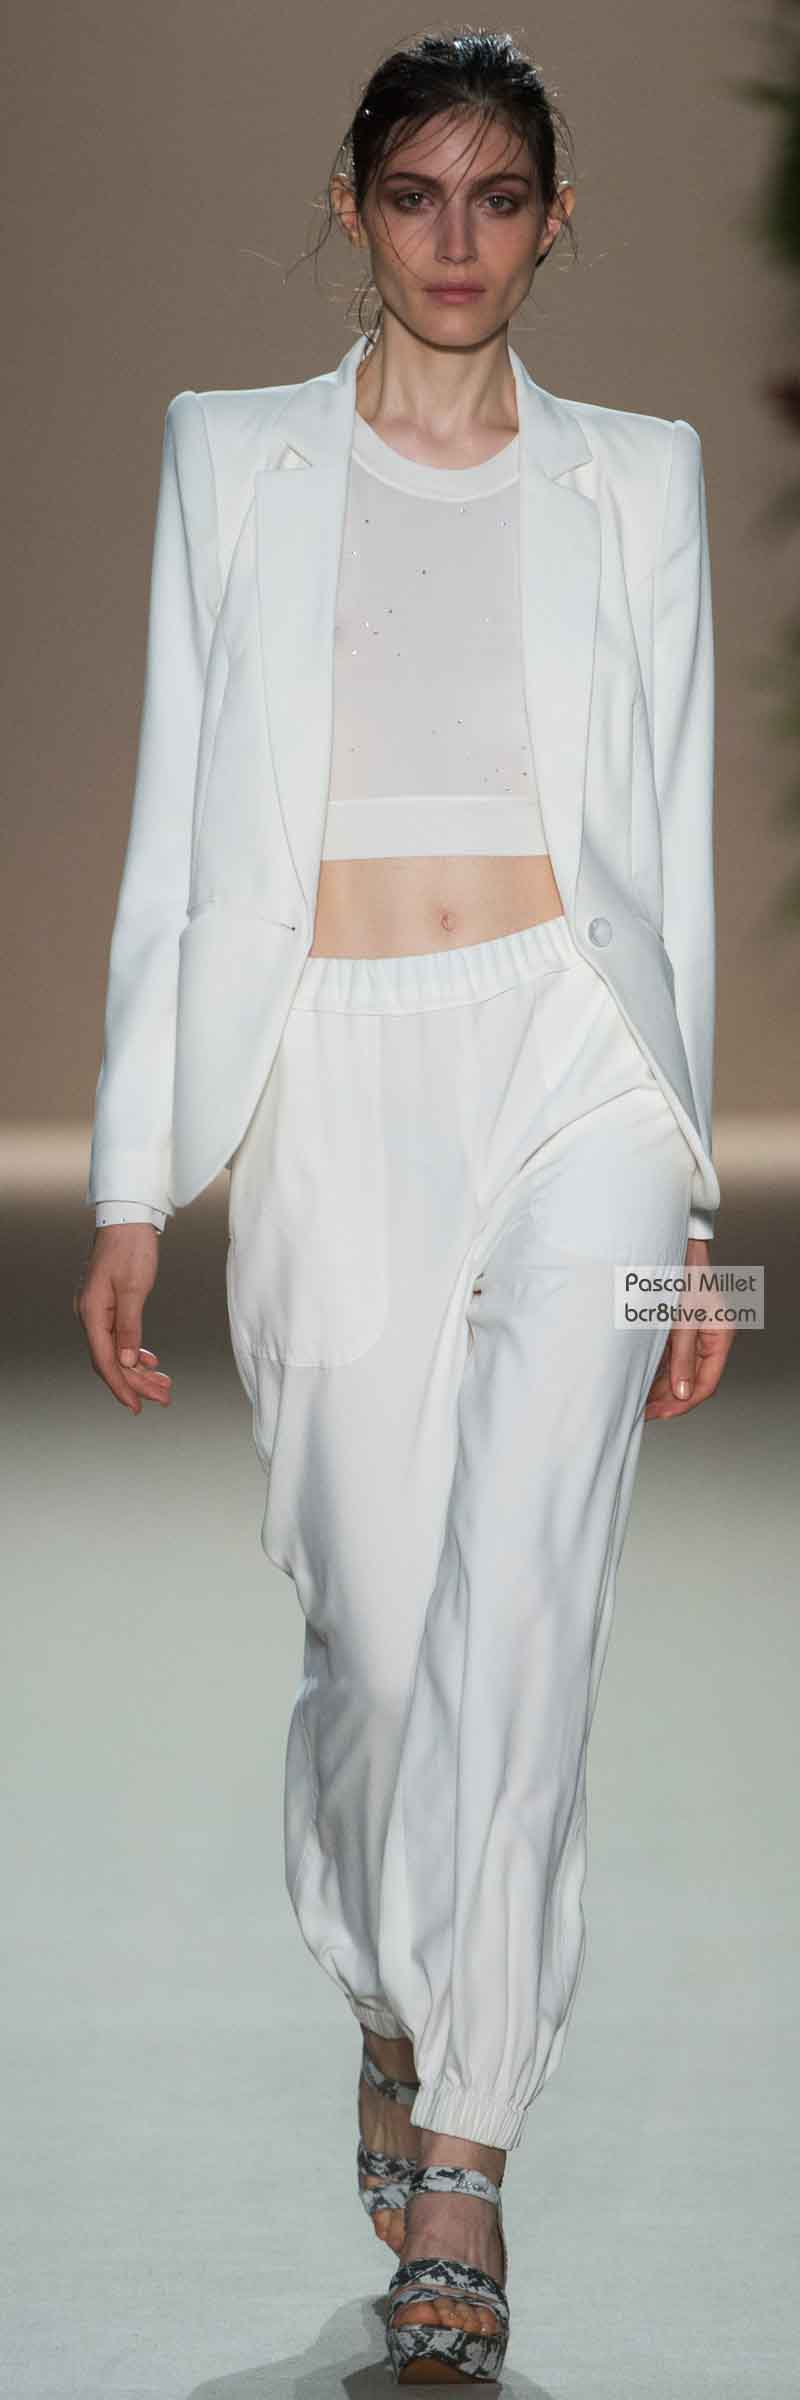 Pascal Millet Spring 2014 – Be Creative